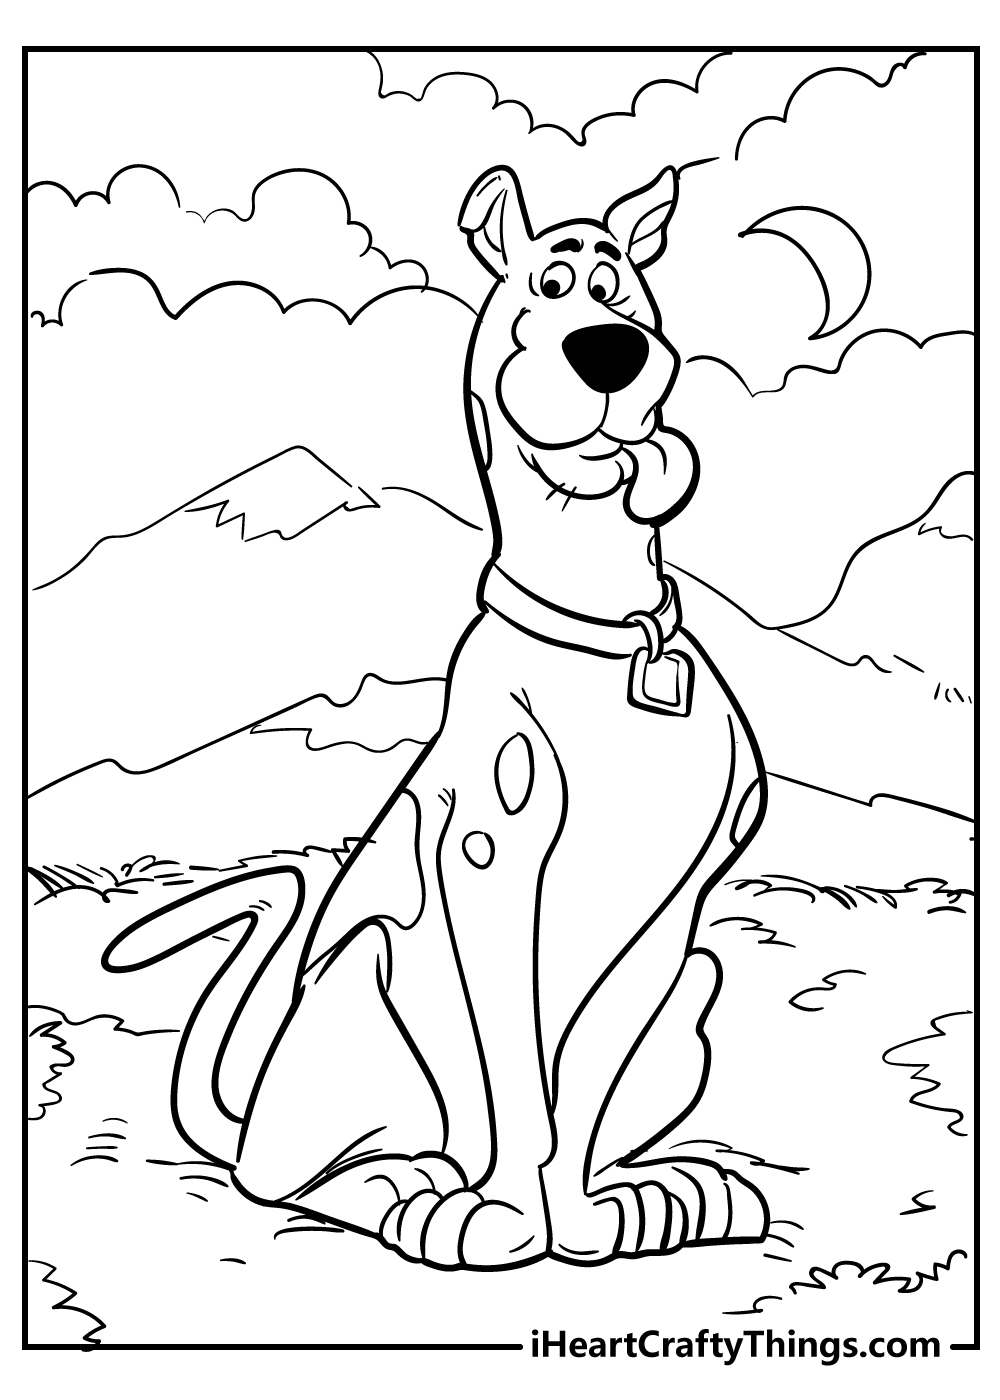 scooby doo halloween coloring pages